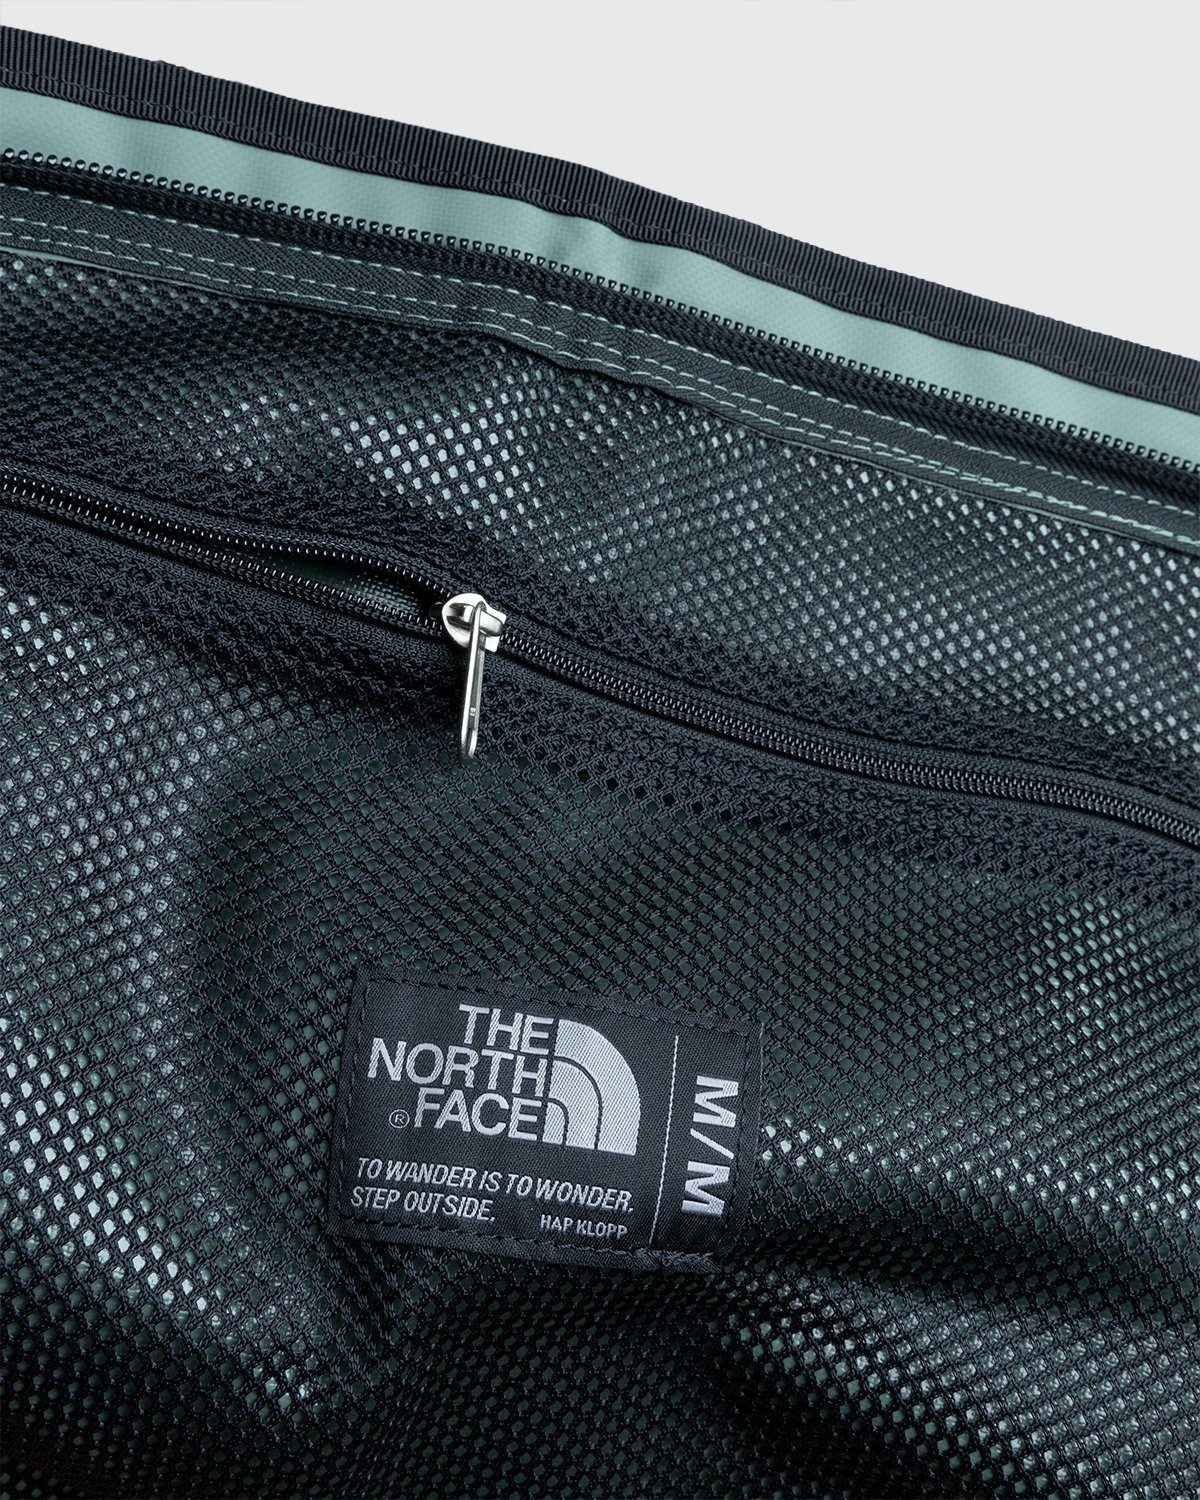 The North Face - Medium Base Camp Duffel - Accessories - Green - Image 6